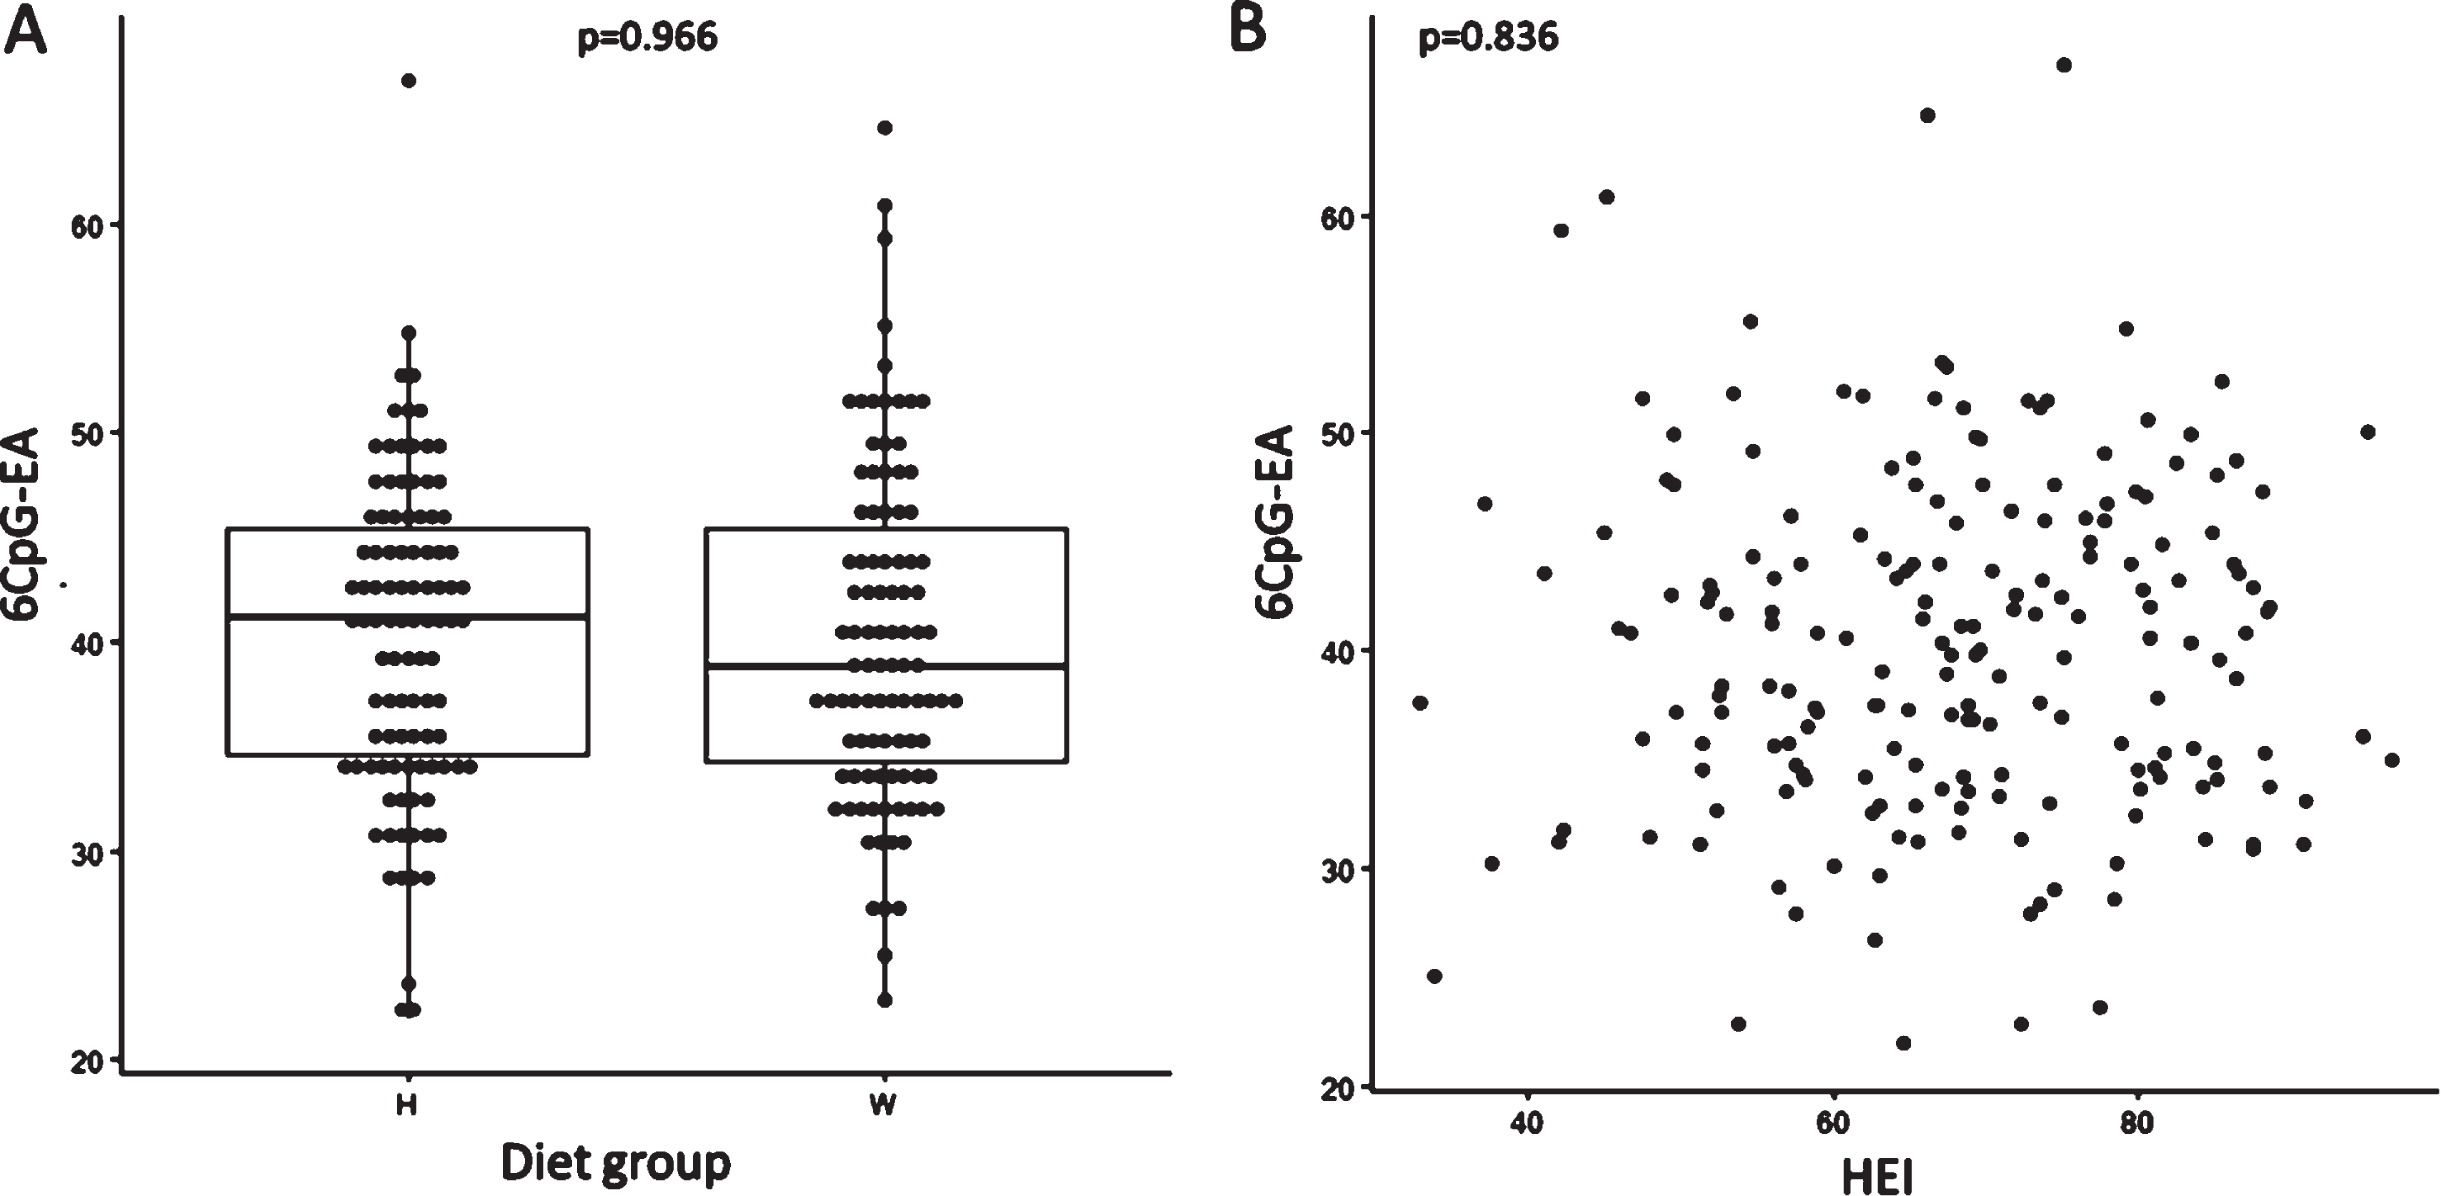 No differences in the 6CpG-EA between healthy and western diet group have been identified (A). No correlation between 6CpG-EA and HEI have been found (B). H: healthy diet group; W: western diet group.